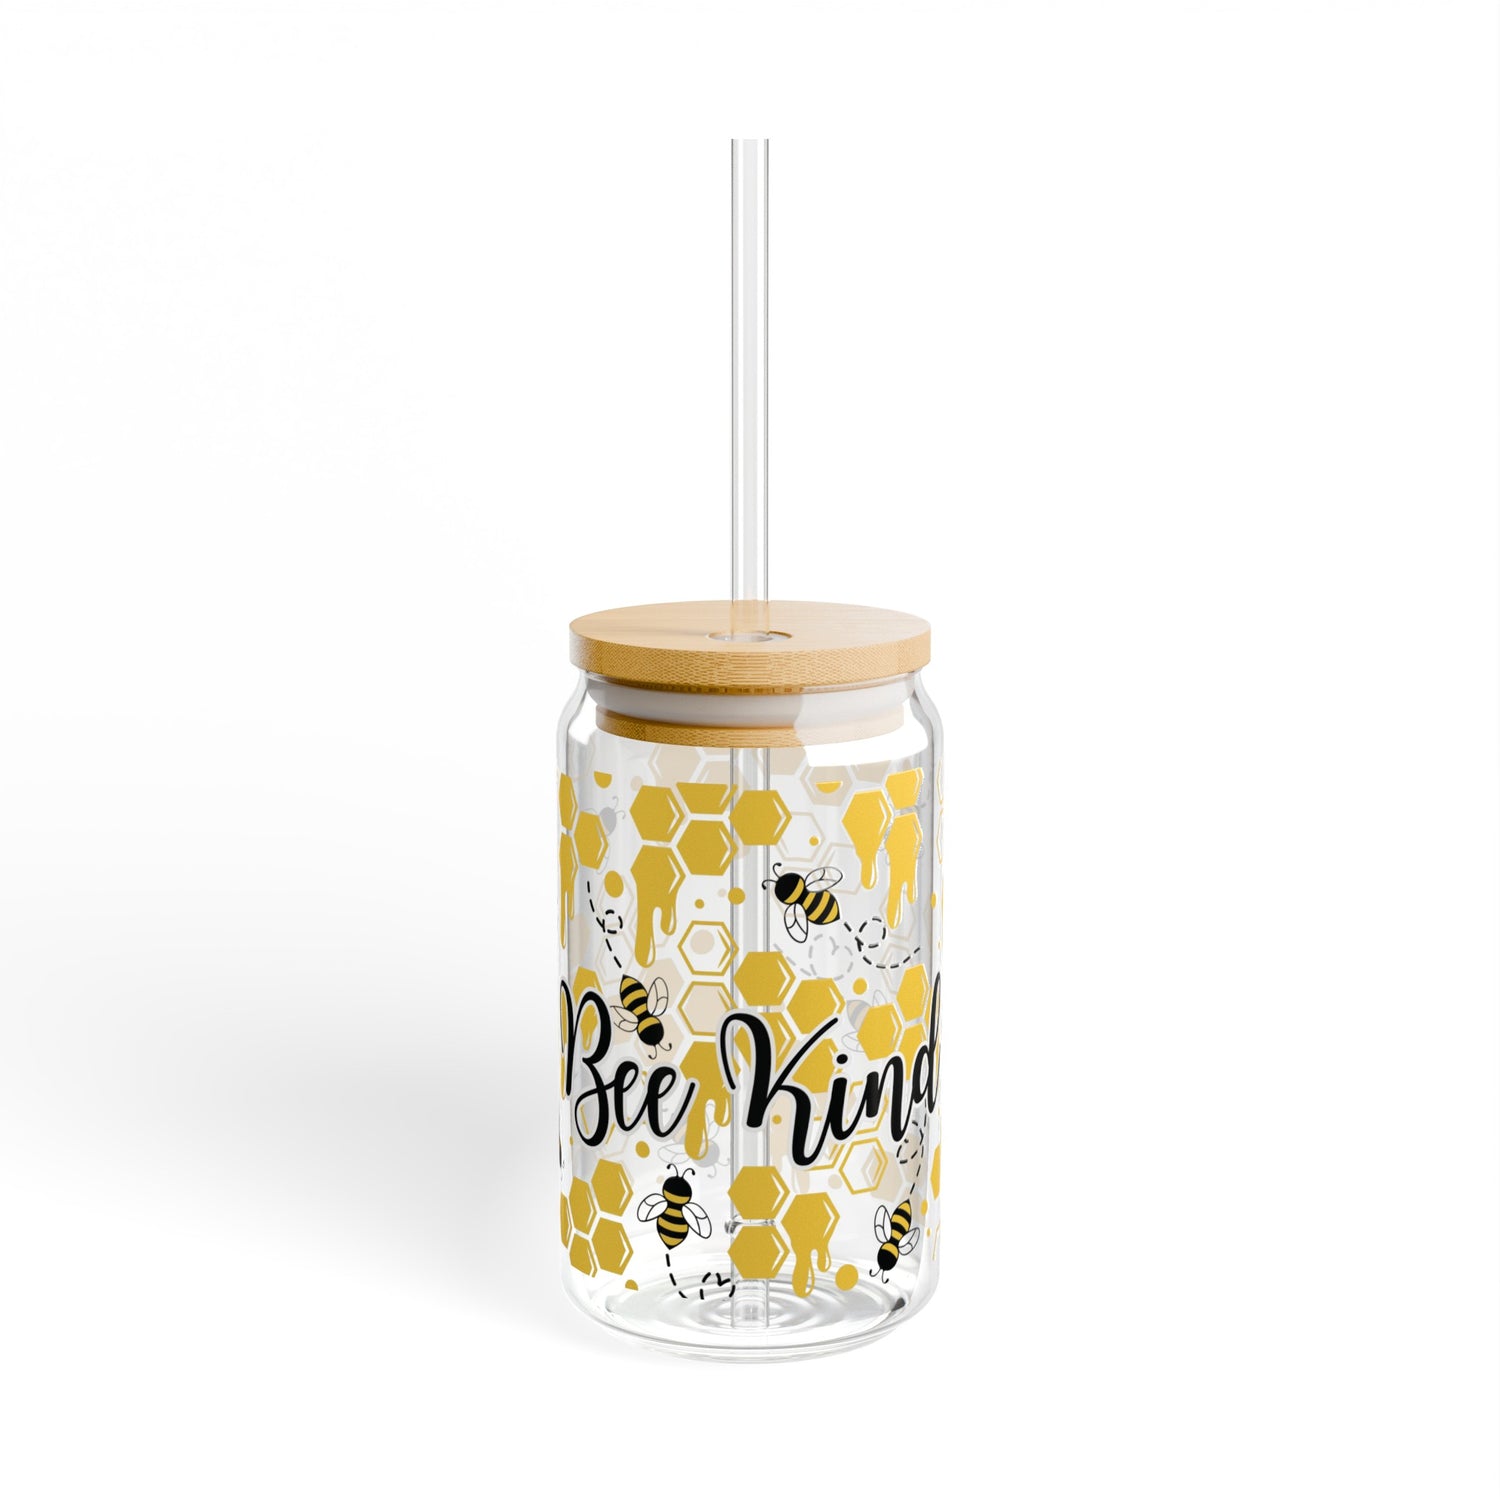 "Bee kind" 16oz Sipper Glass